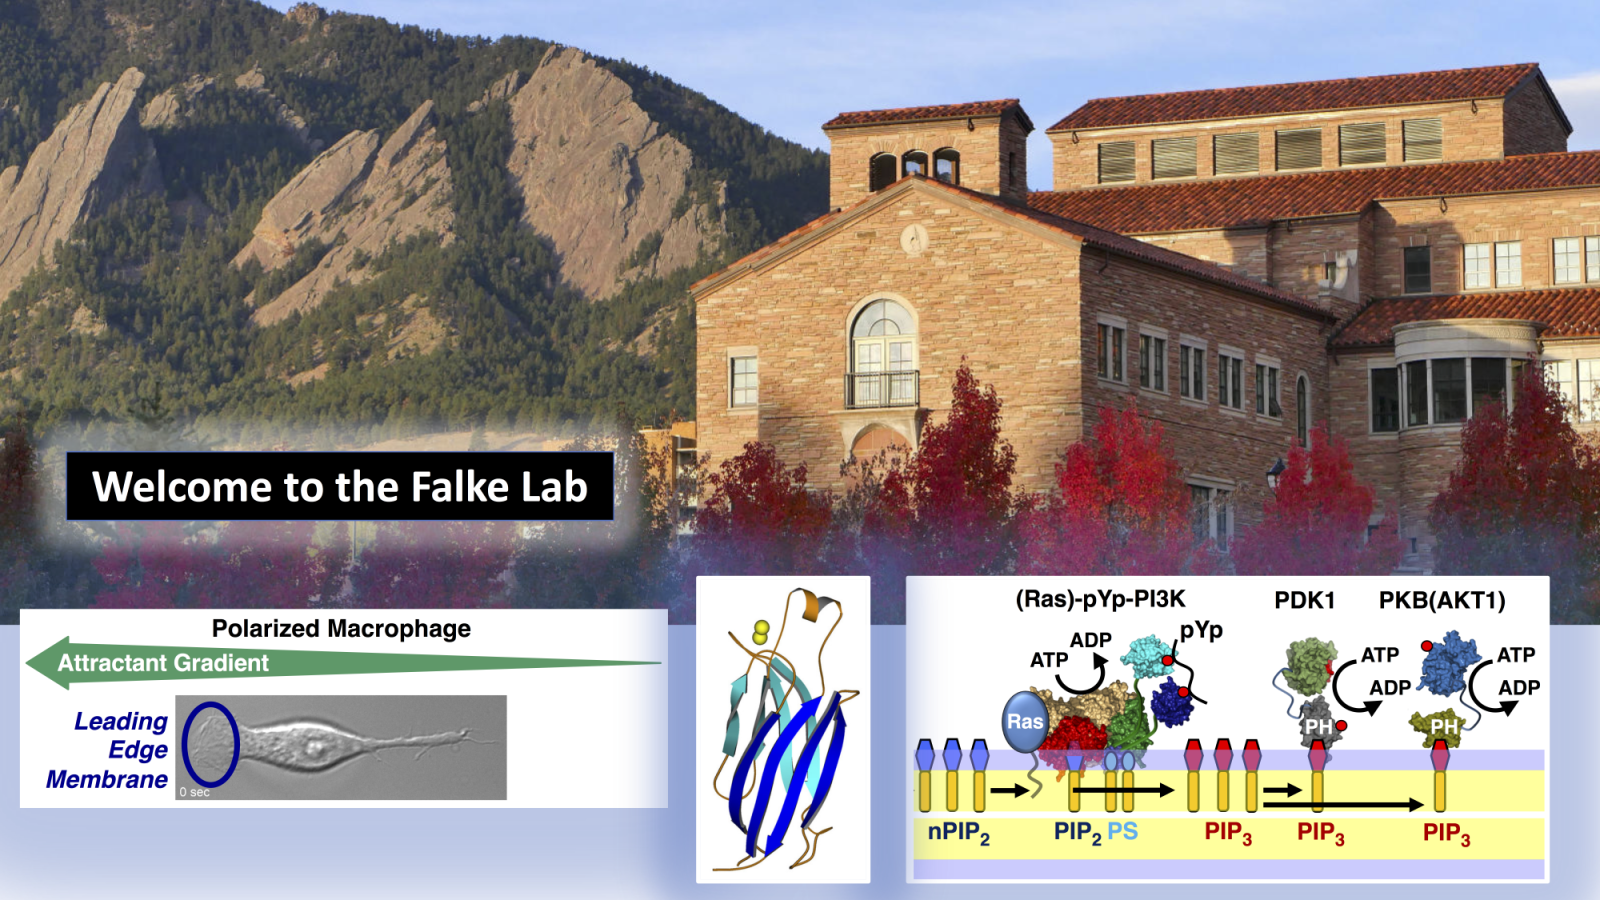 Welcome to the Falke lab, showing a mountain scene with images of a macrophage, a protein, and a pathway